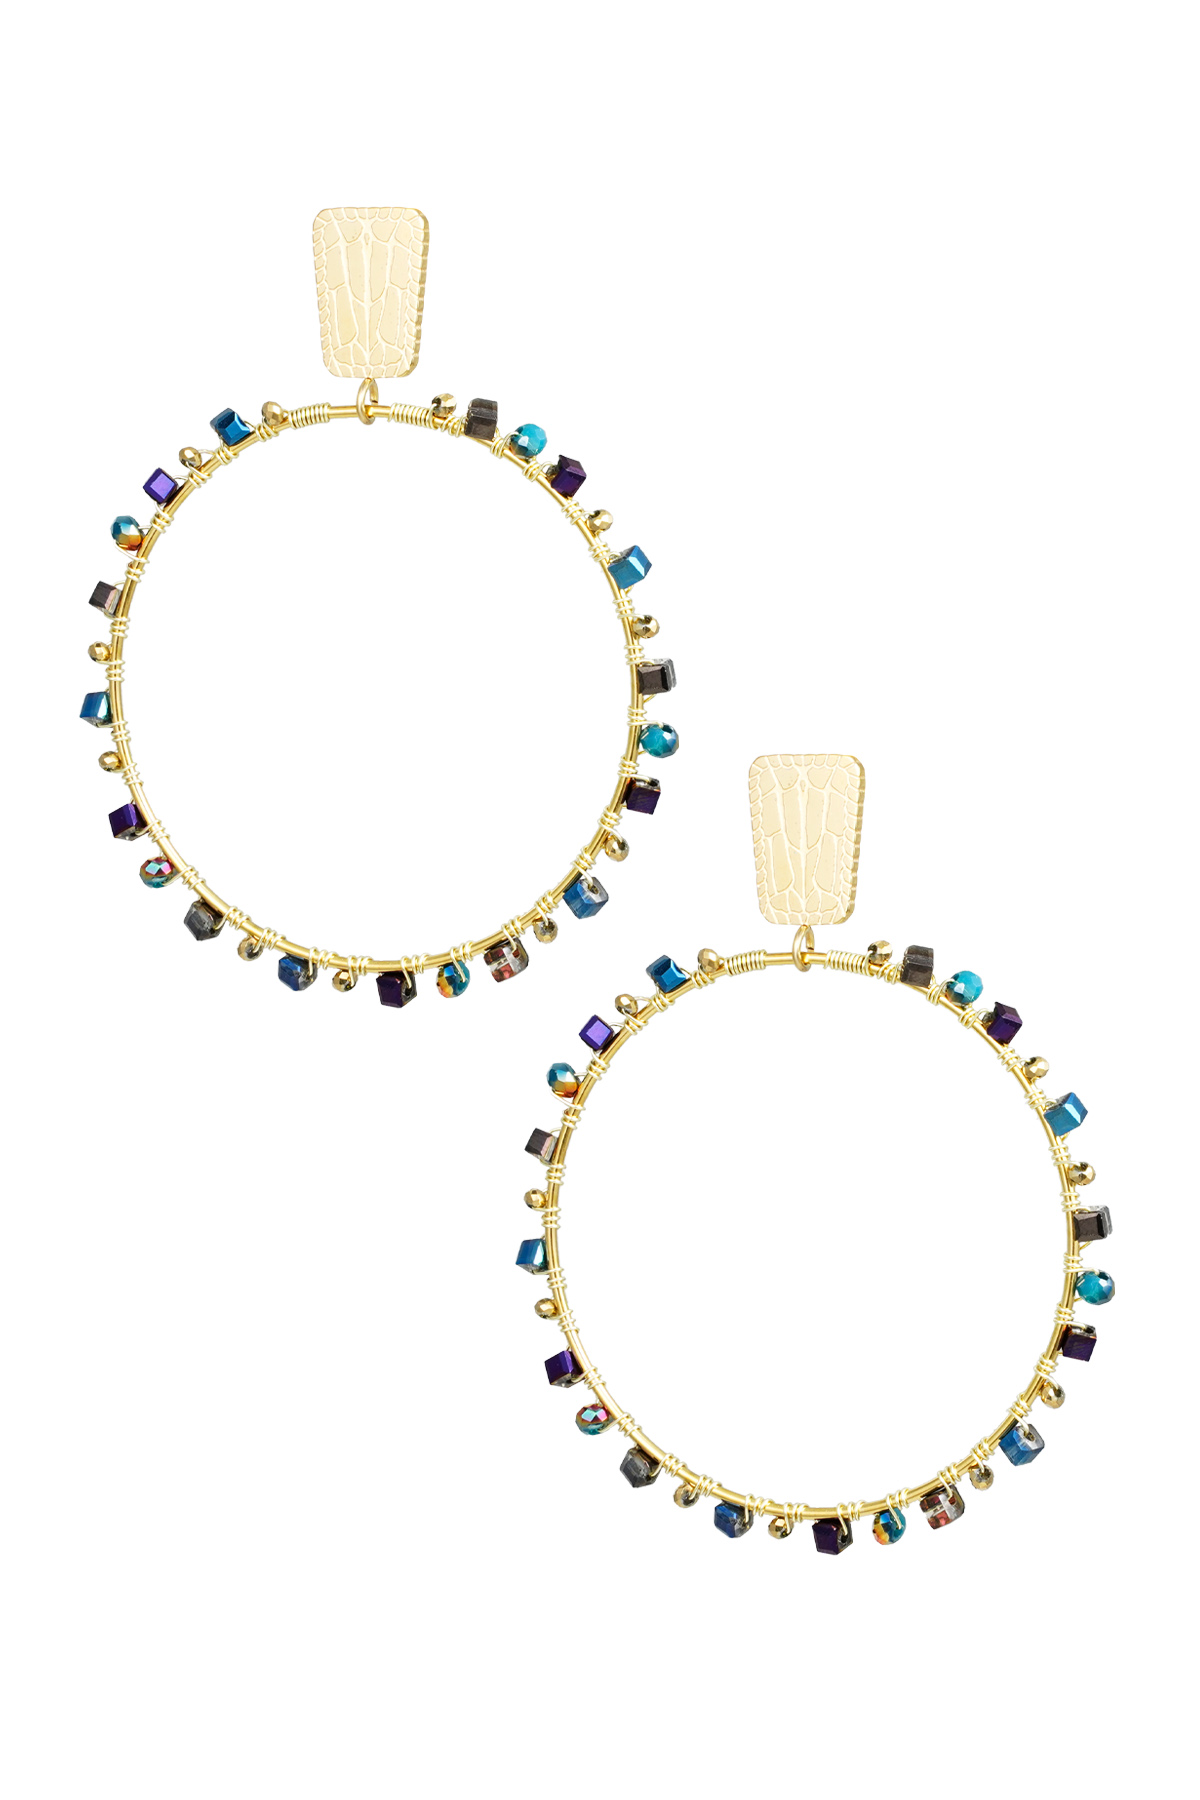 Round earrings with beads - gold/blue h5 